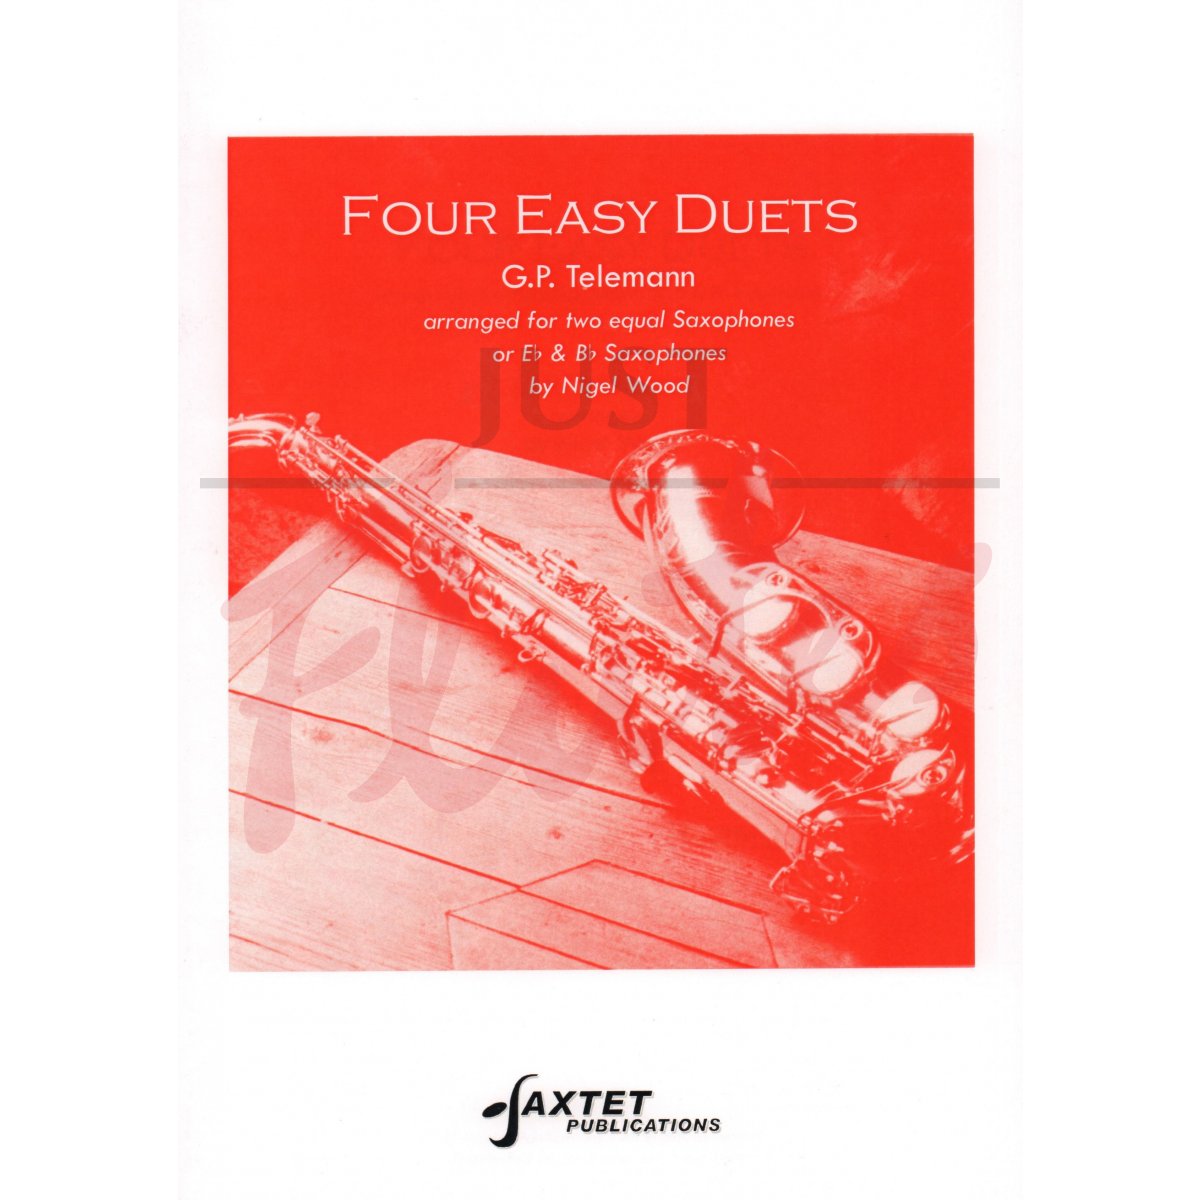 Four Easy Duets for Two Saxophones